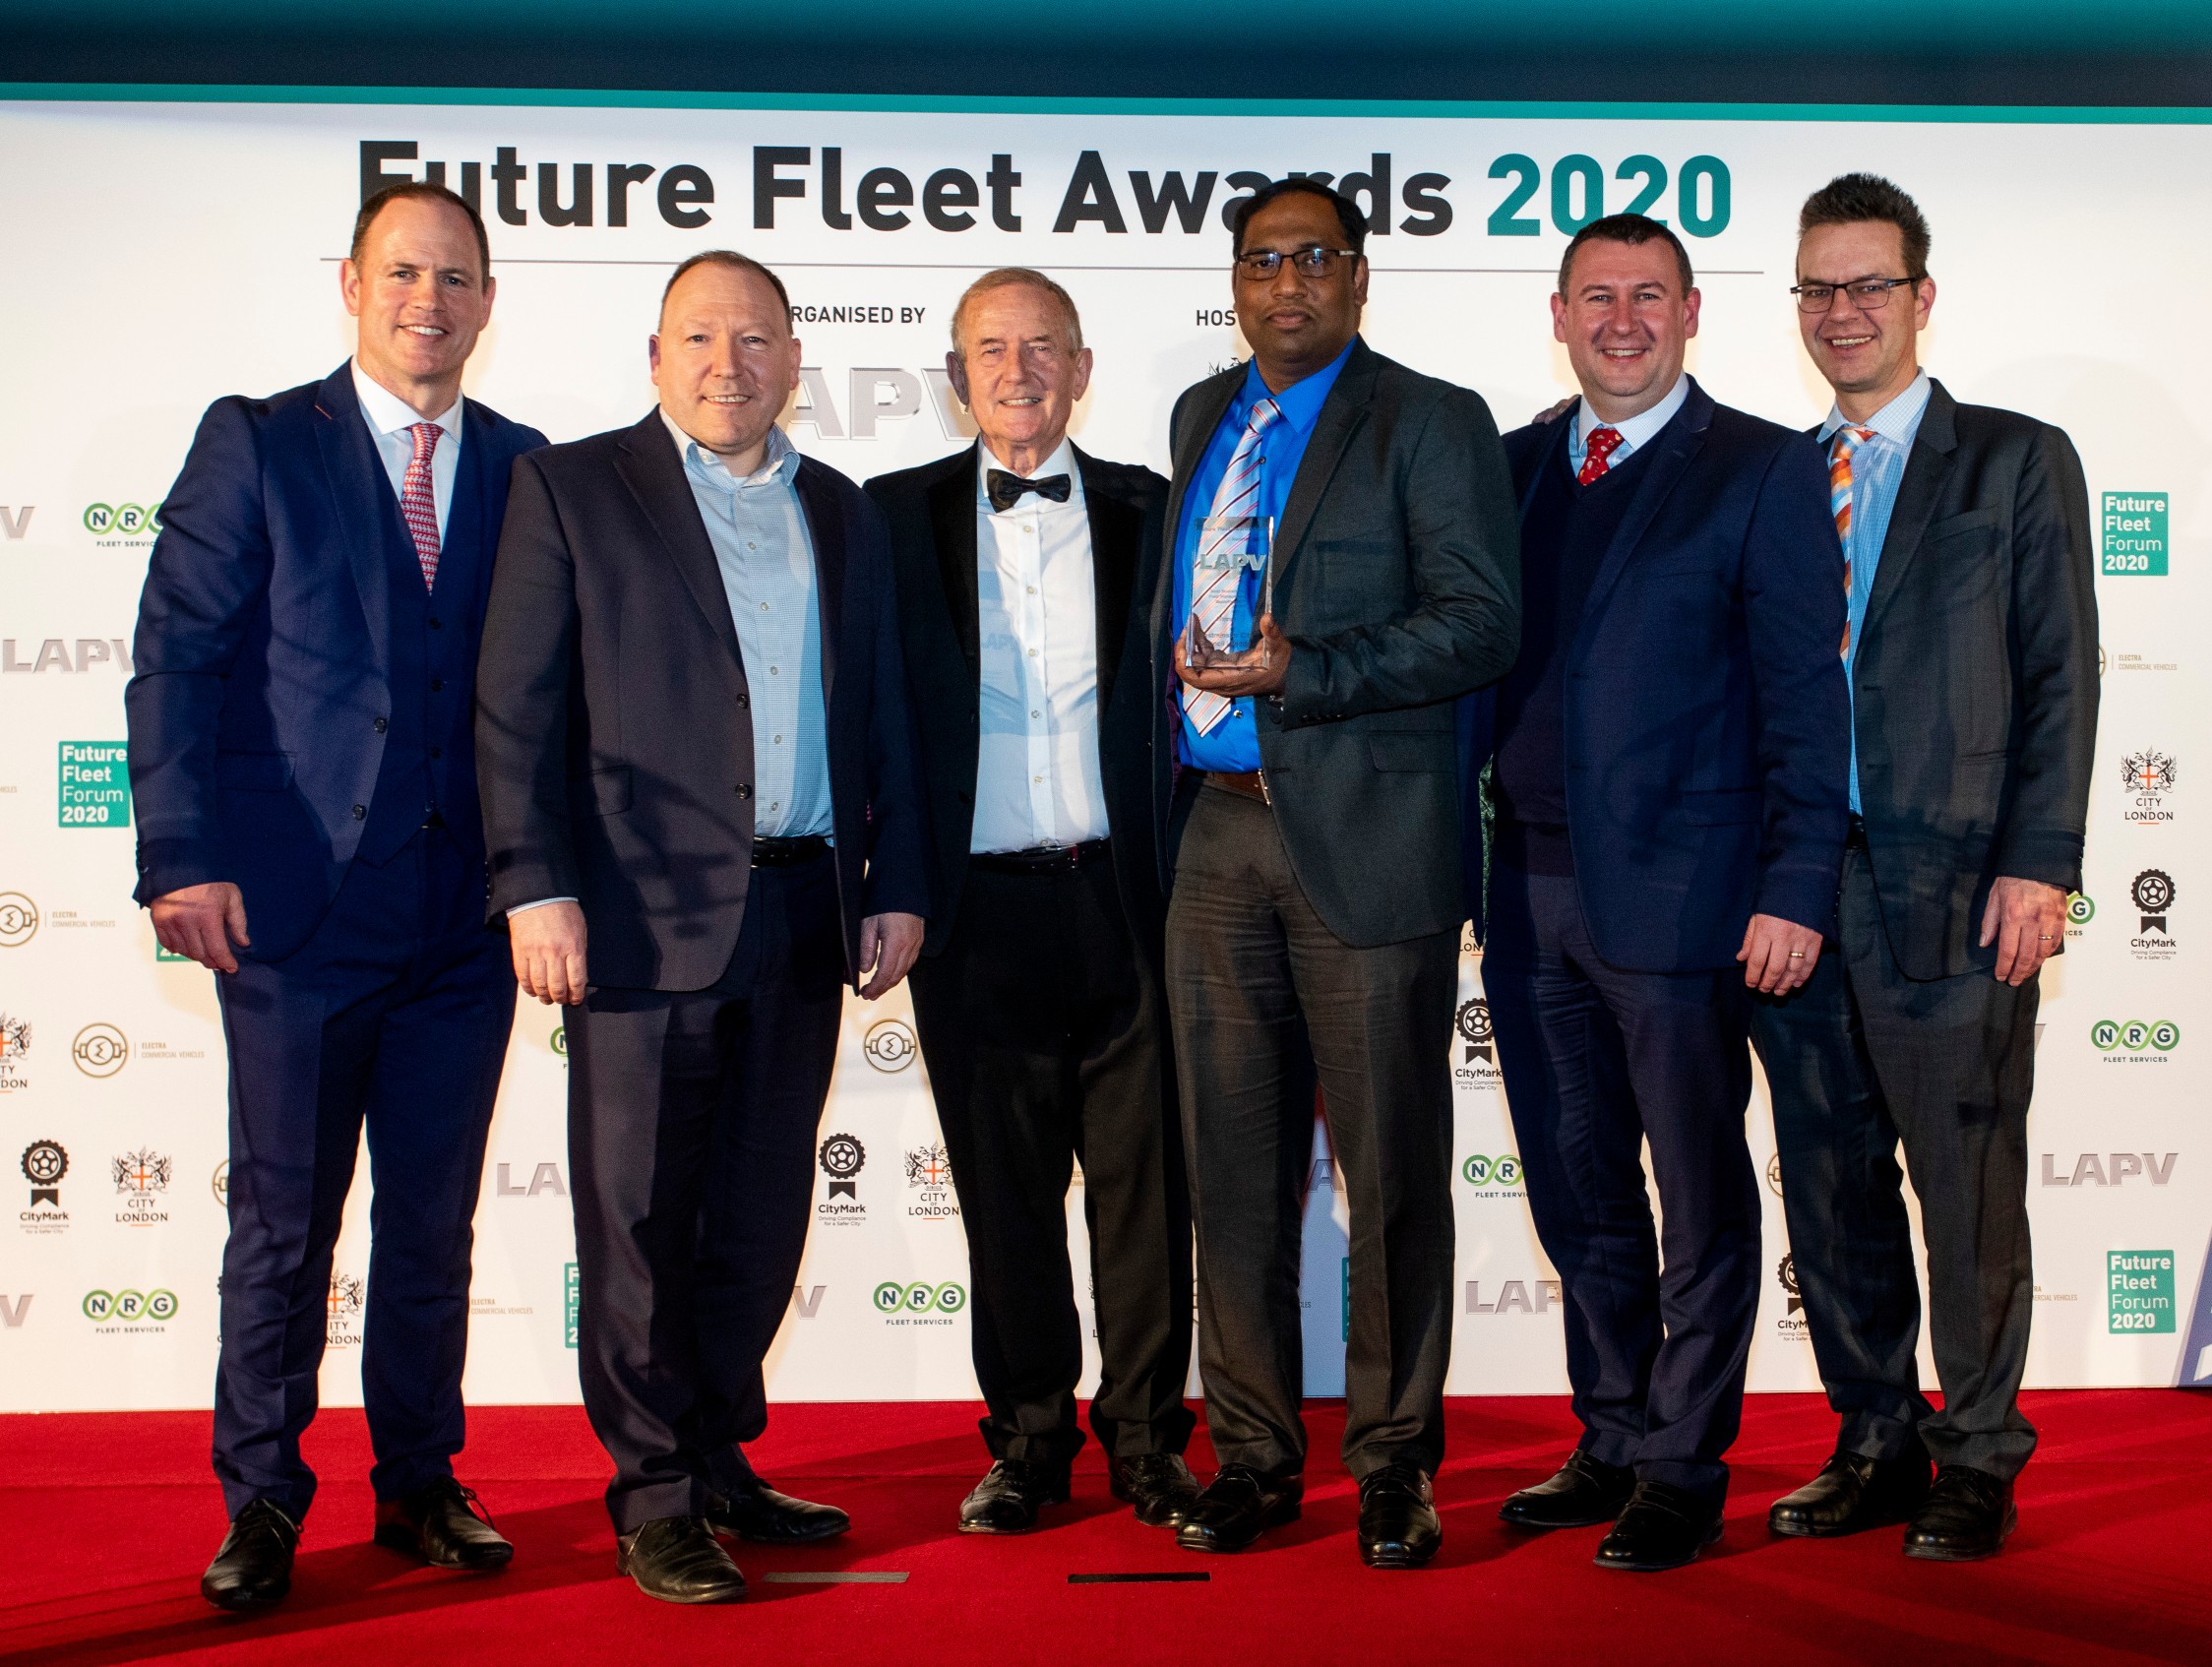 Most sustainable fleet management department - Westminster City Council/Veolia